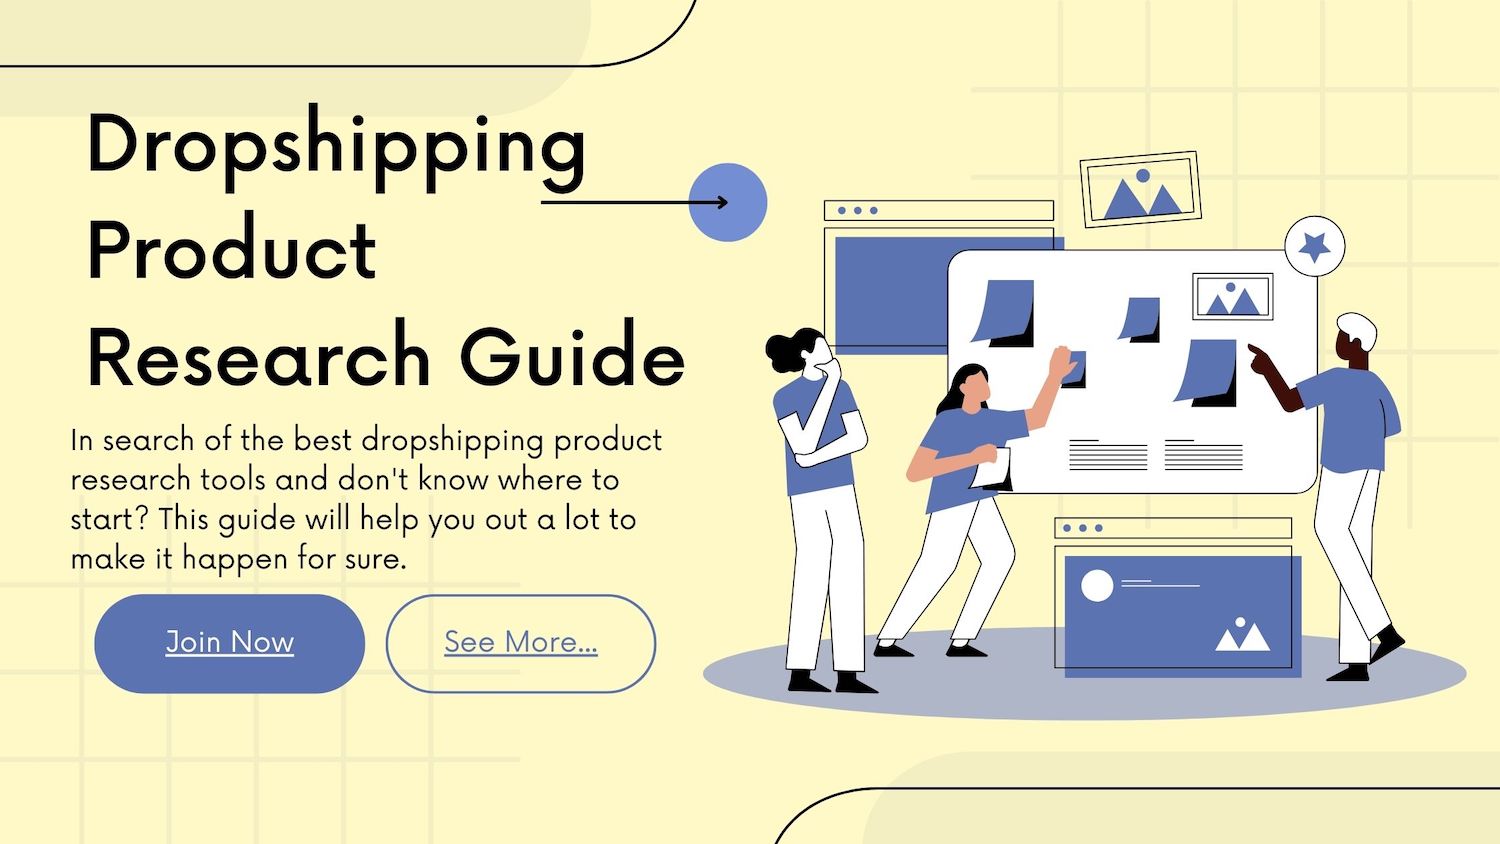 Dropshipping Product Research Guide